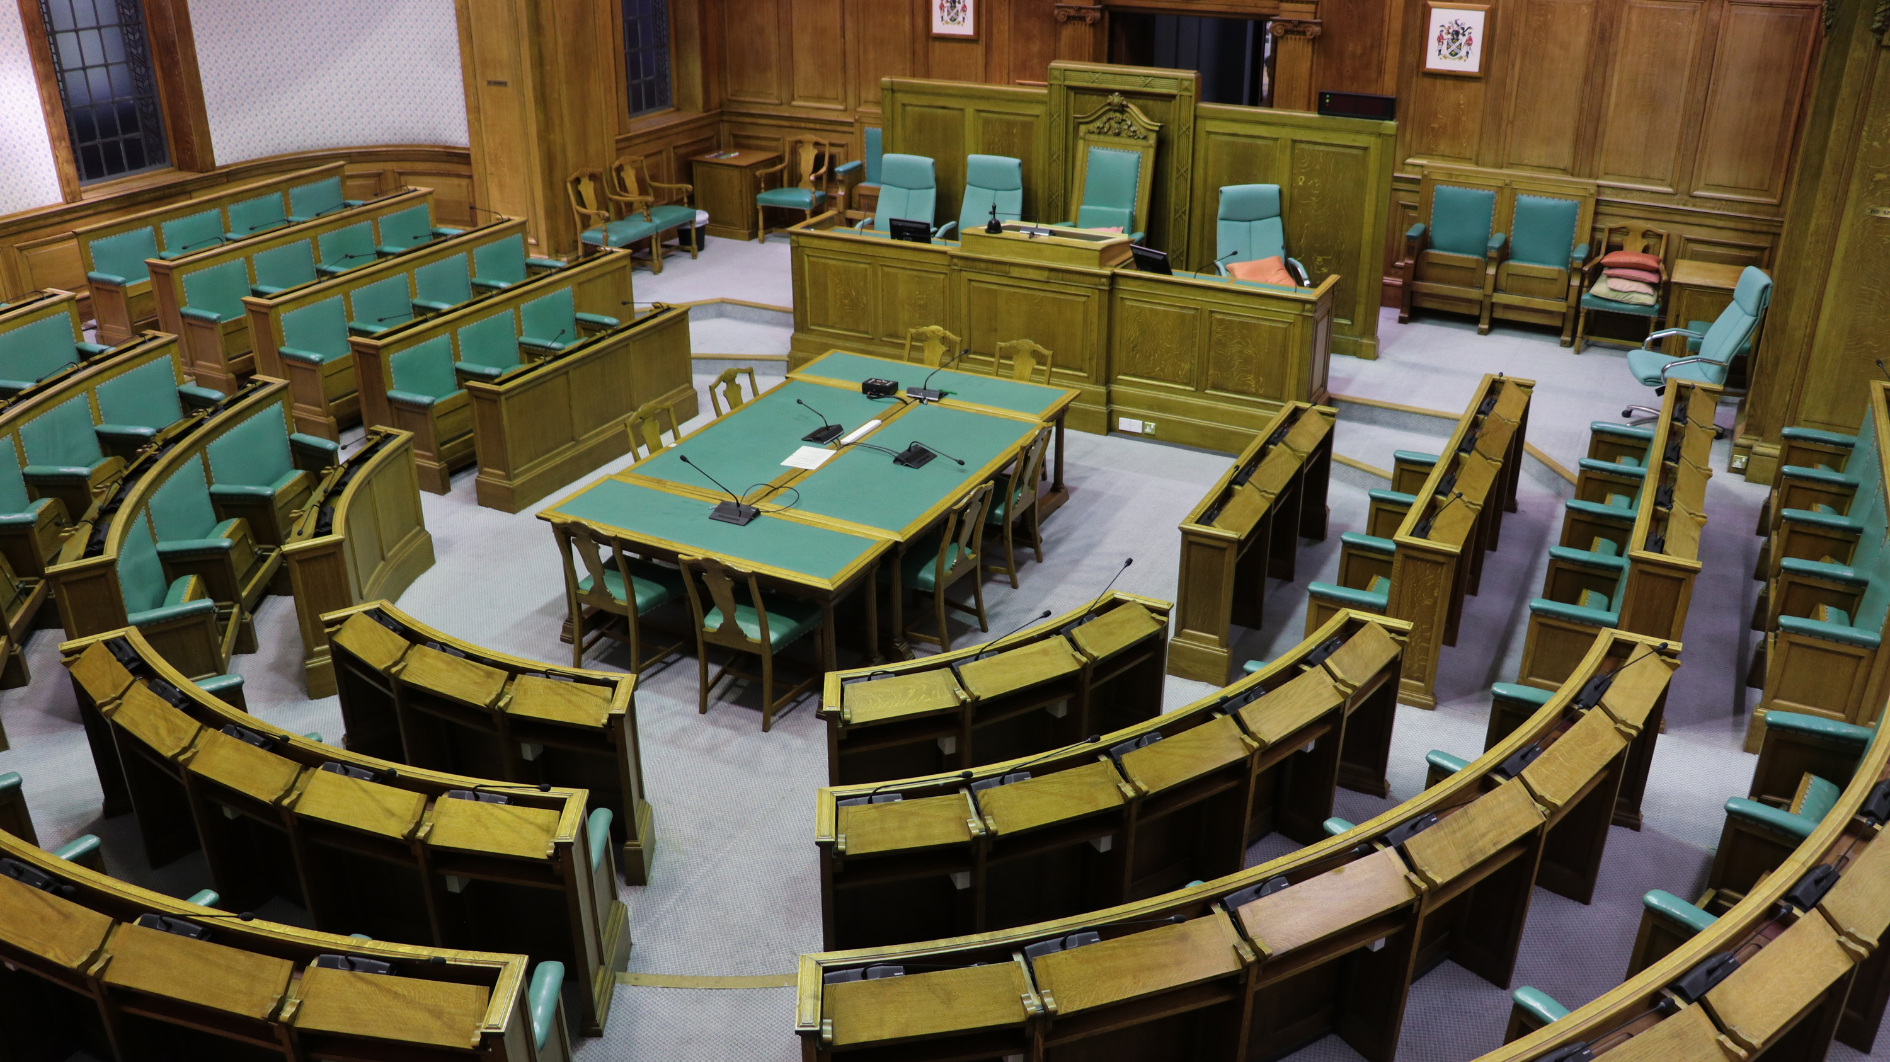 Council chamber in the county council building. Seats all sat in a seminar style in green and dark wood